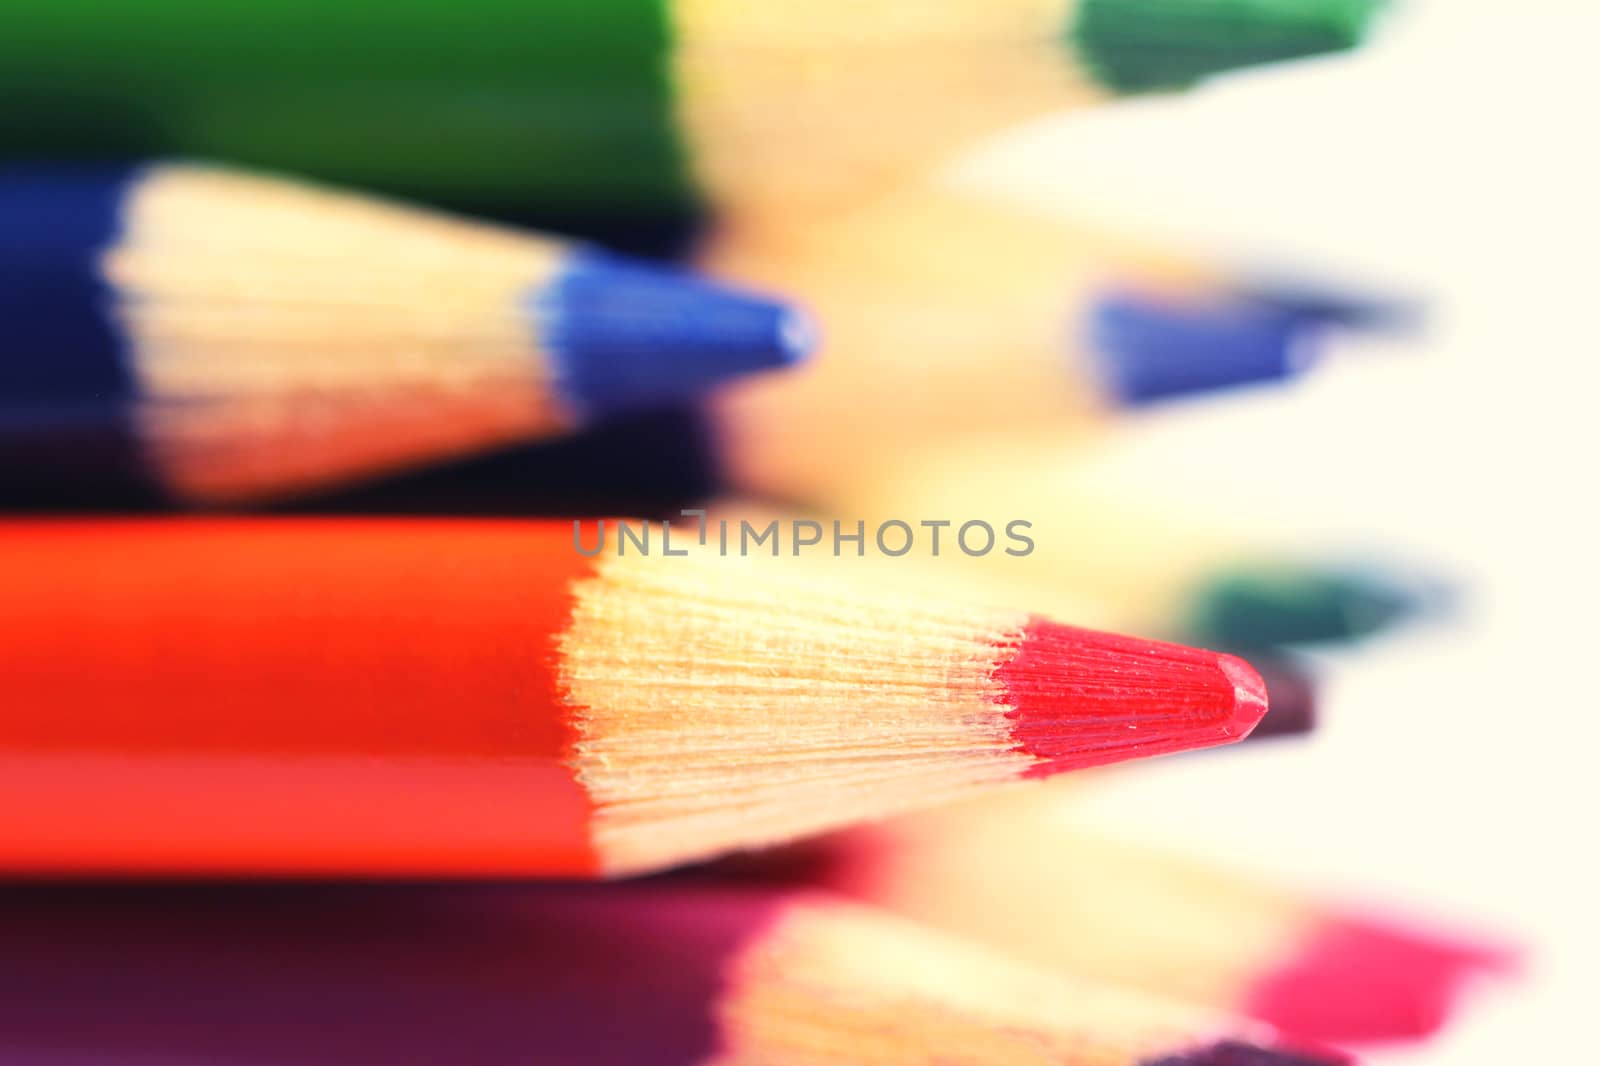 Pencils of different colors close up by Voinakh